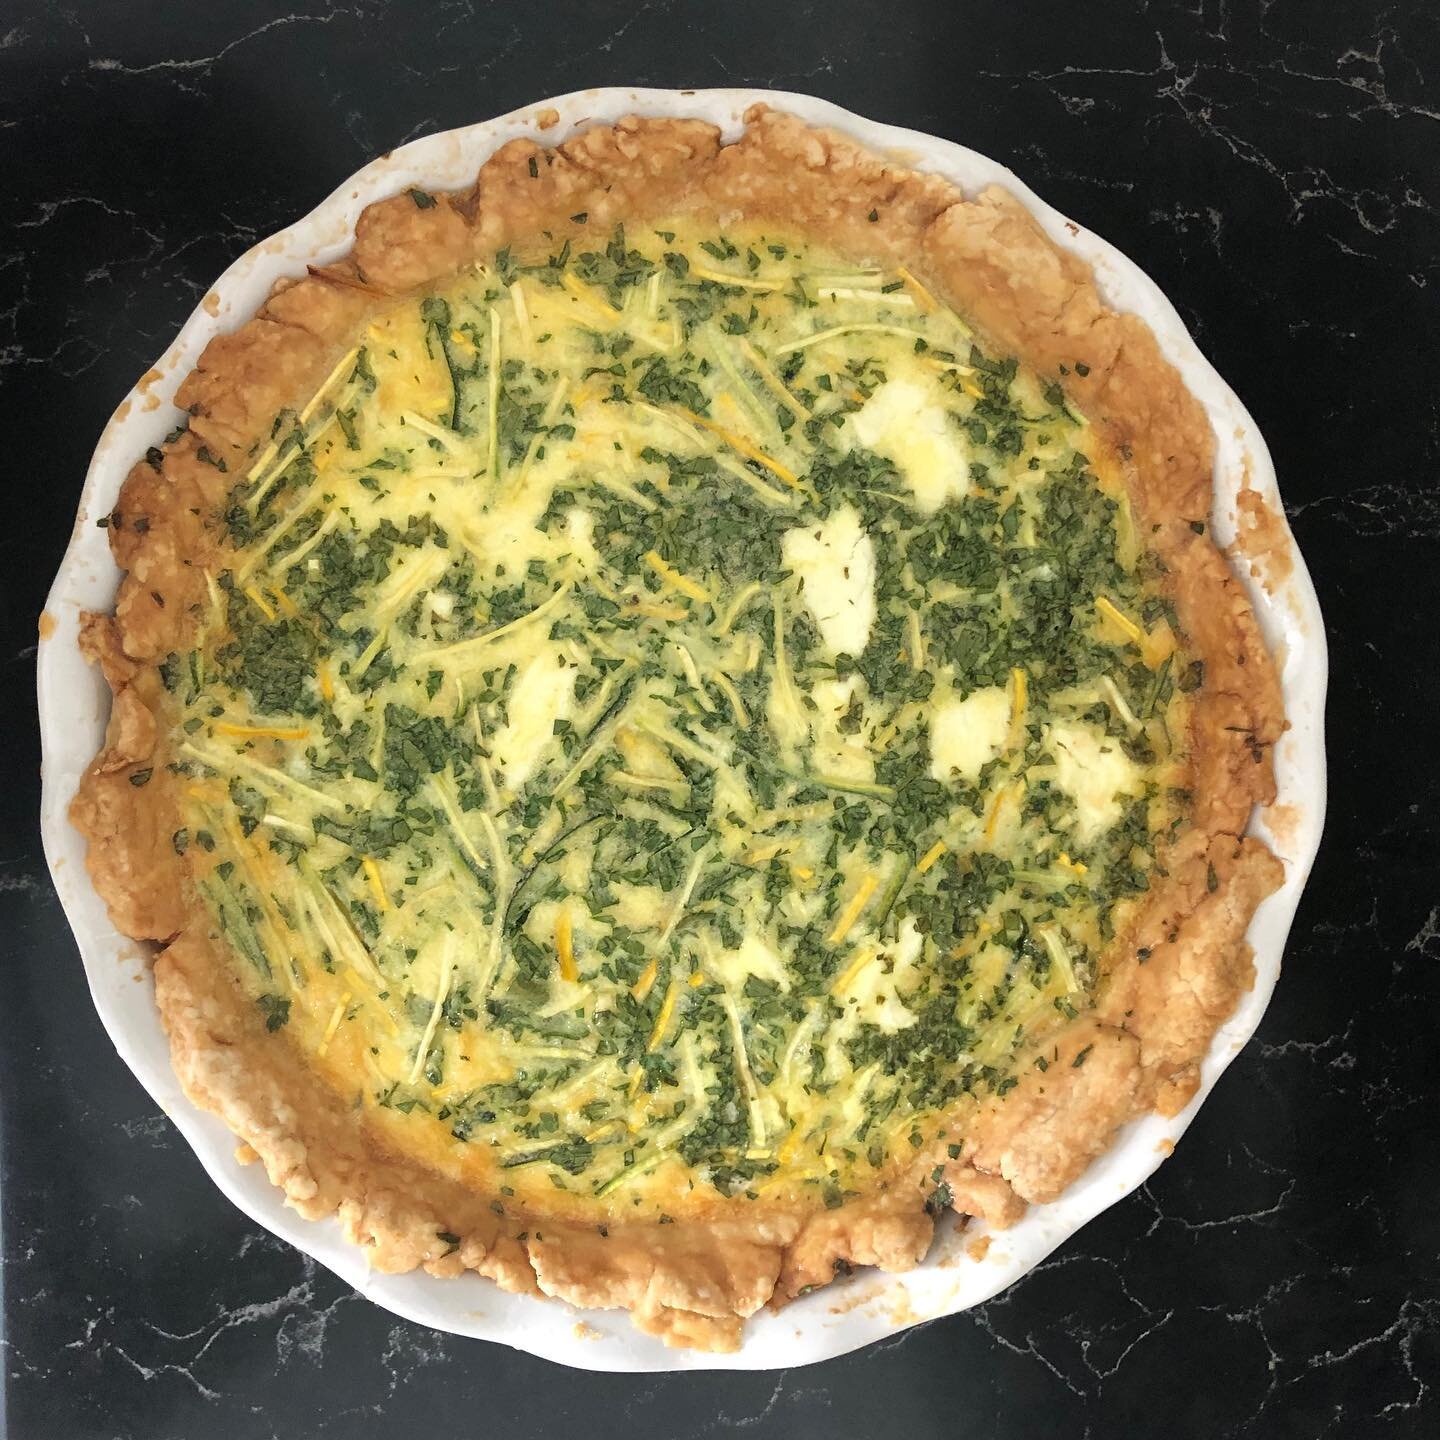 Our Sunday Brunch special this week is a Zucchini, Parsley and Goat Cheese quiche! It is homemade, delicious, and we cannot wait for you to enjoy 🔥 Make sure to Dine-In or Order Out while supplies last! 🍽
.
.
.
.
.
#burbankfood #thenewdeal #brunch 